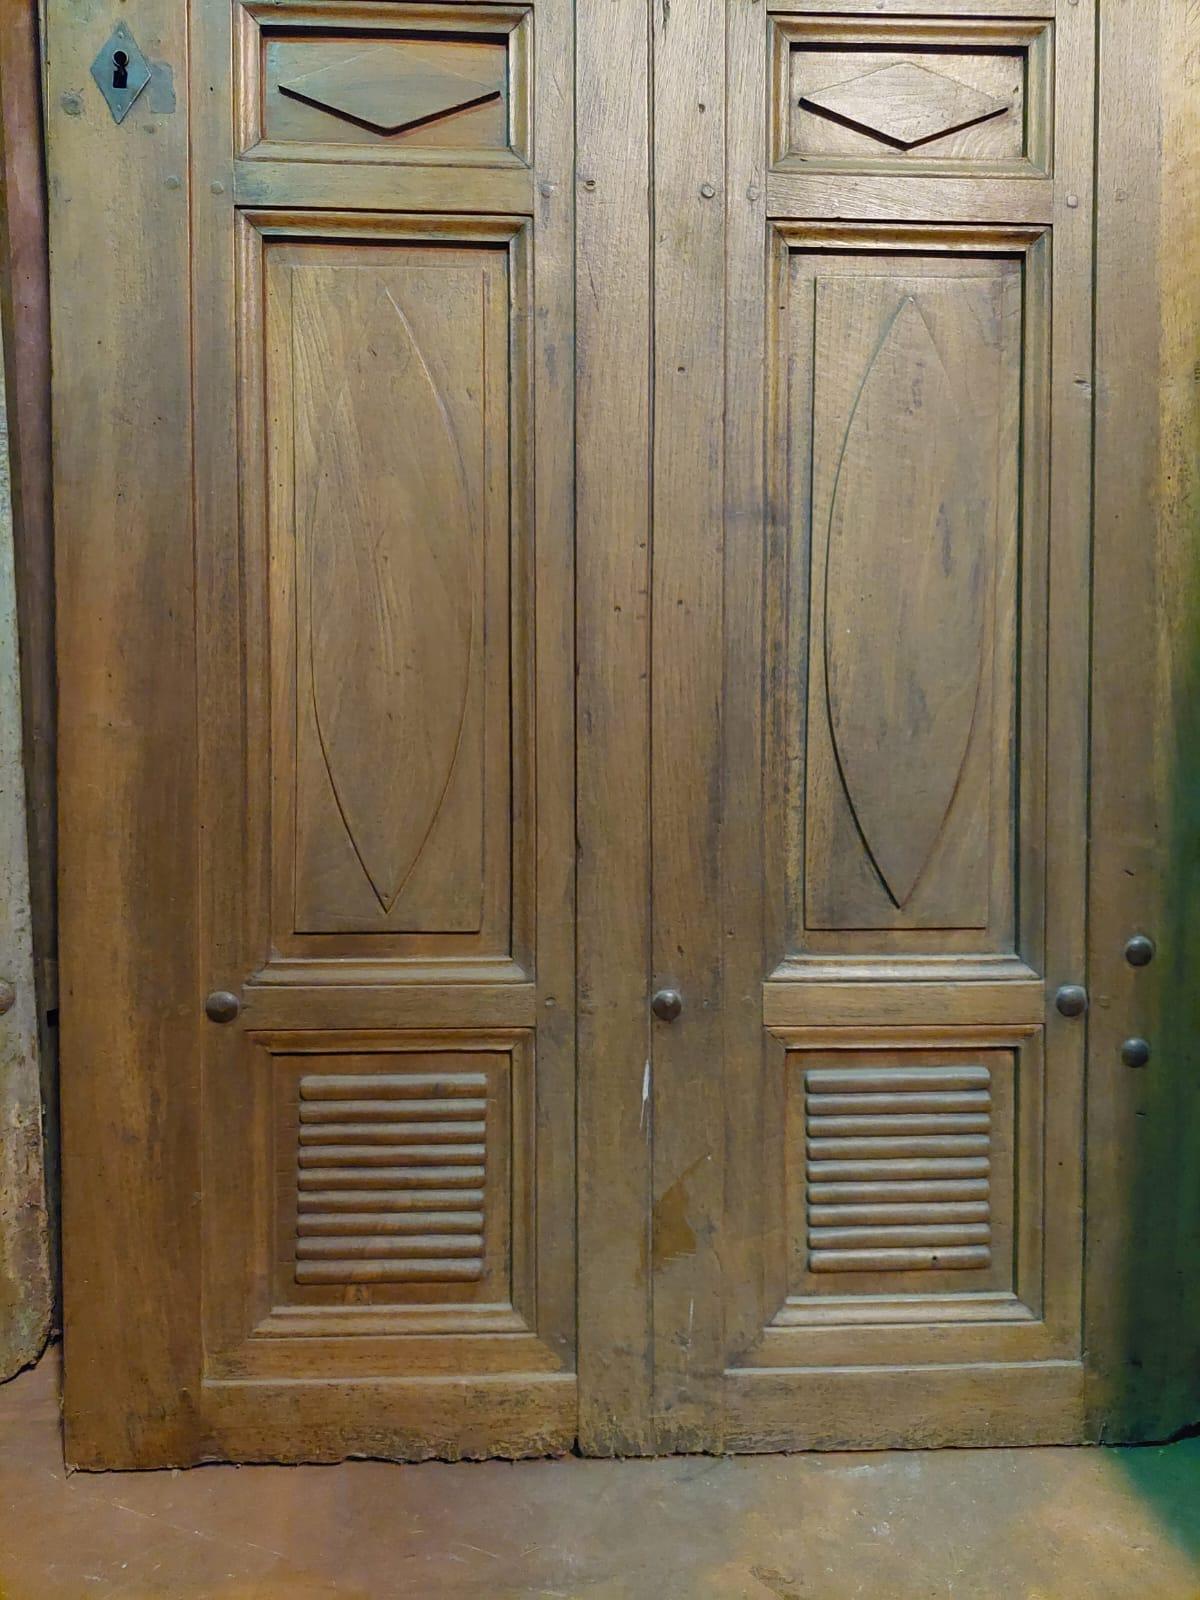 Antique Entrance door, single-leaf main door, elegantly hand-carved in precious solid walnut wood, carved with almond shapes typical of northern Italy, 19th century, push opening to the right, originally it was a double door swing, later reconverted